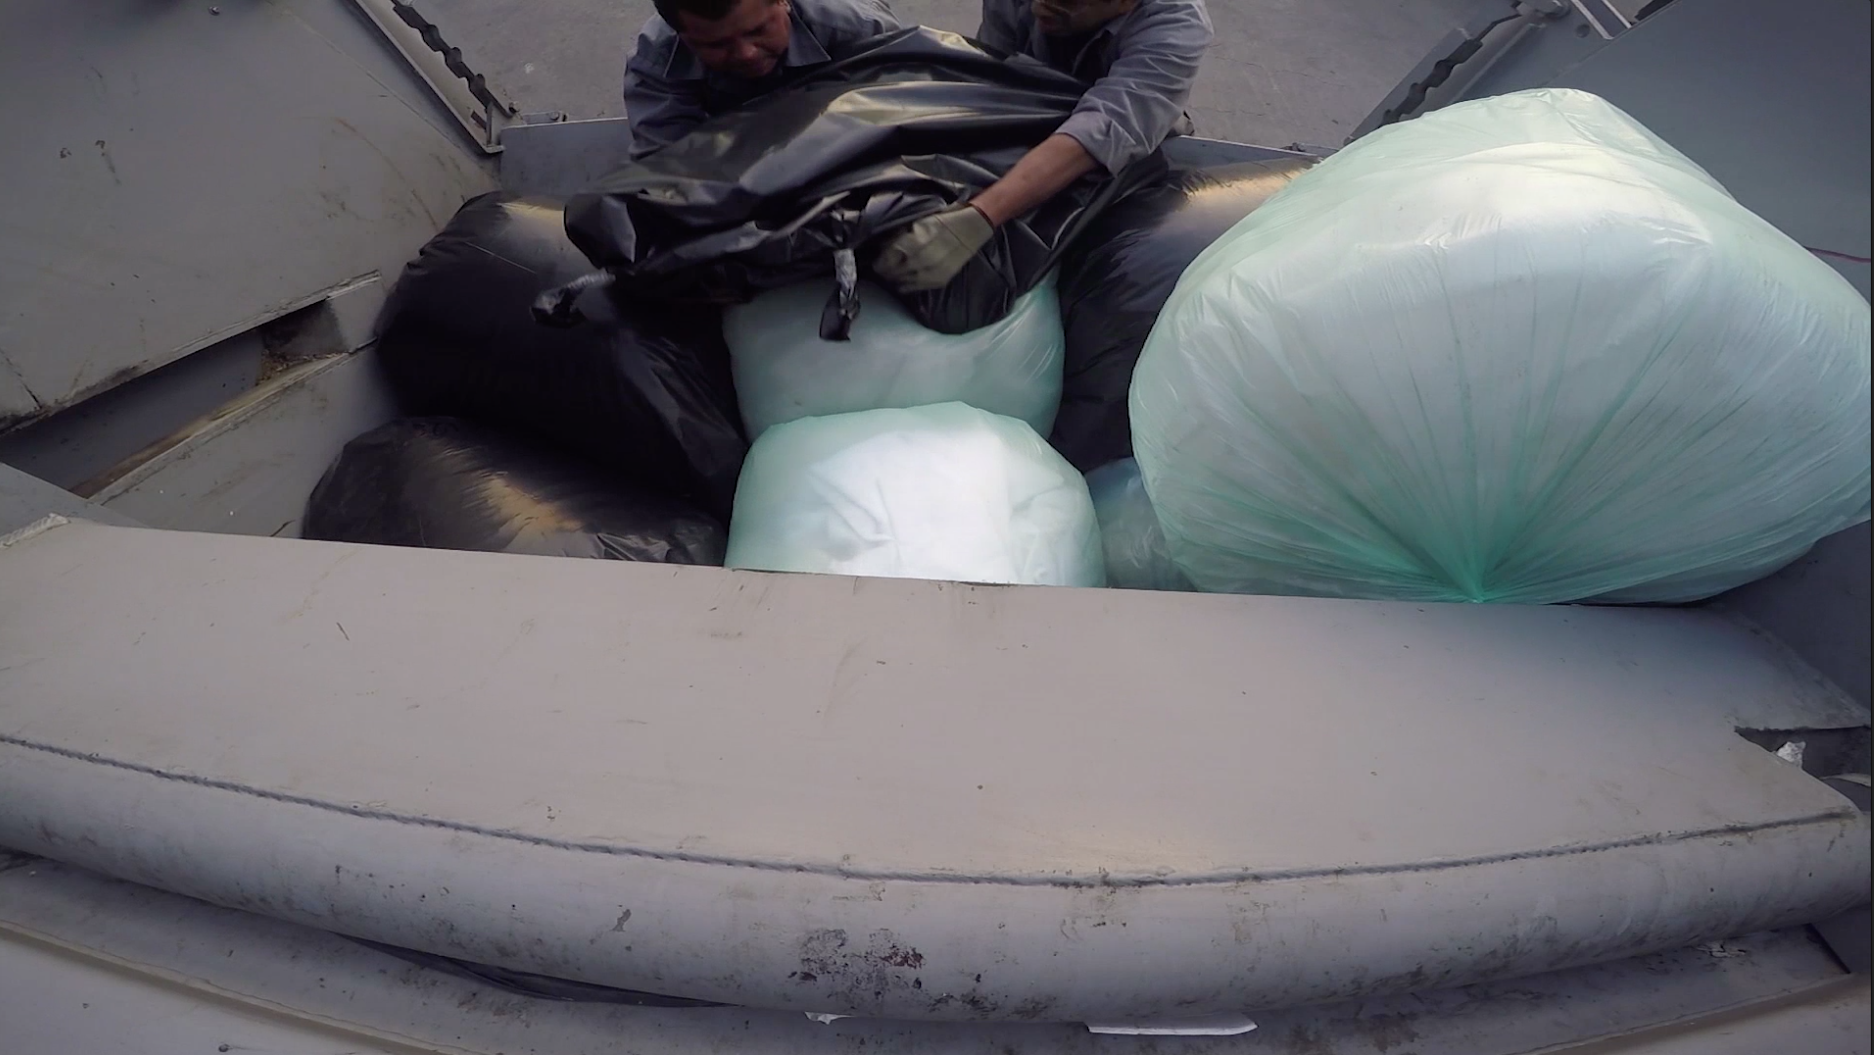 A video still of sanitation workers loading artist Regina Jose Galindo, in a garbage bag, as part of a performance called "Desecho."